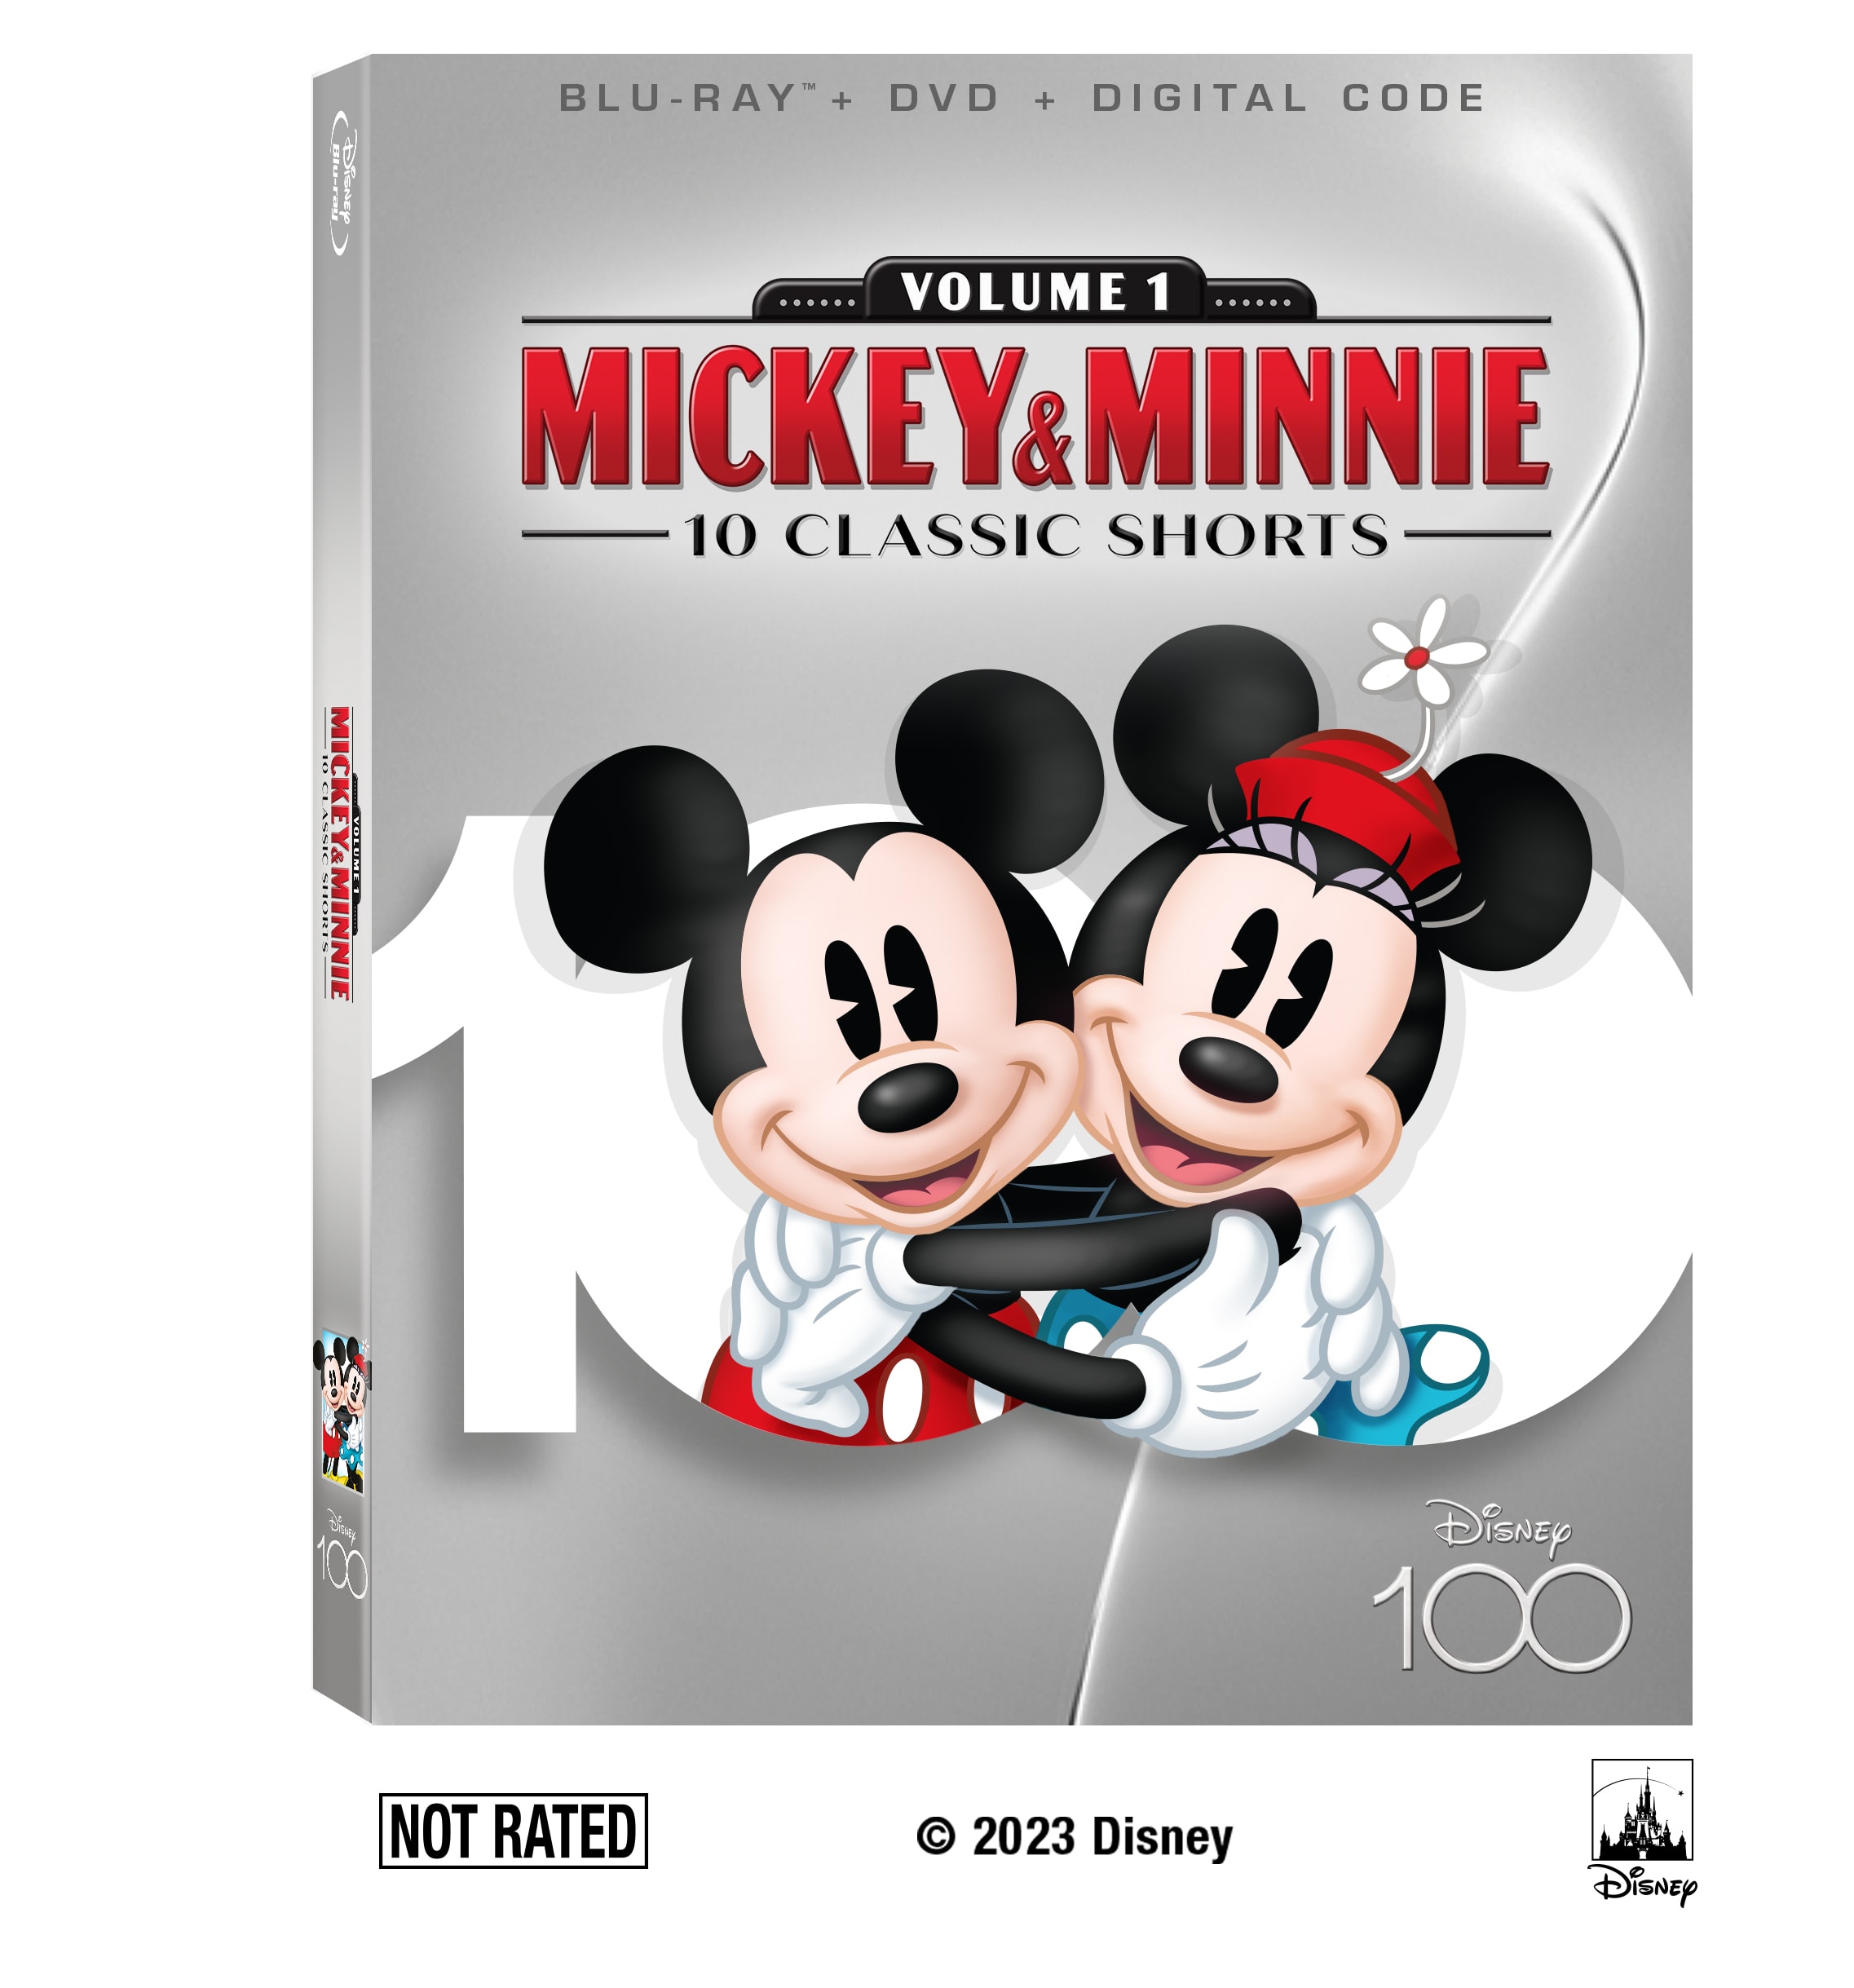 Mickey & Minnie 10 Classic Shorts Volume 1 Features